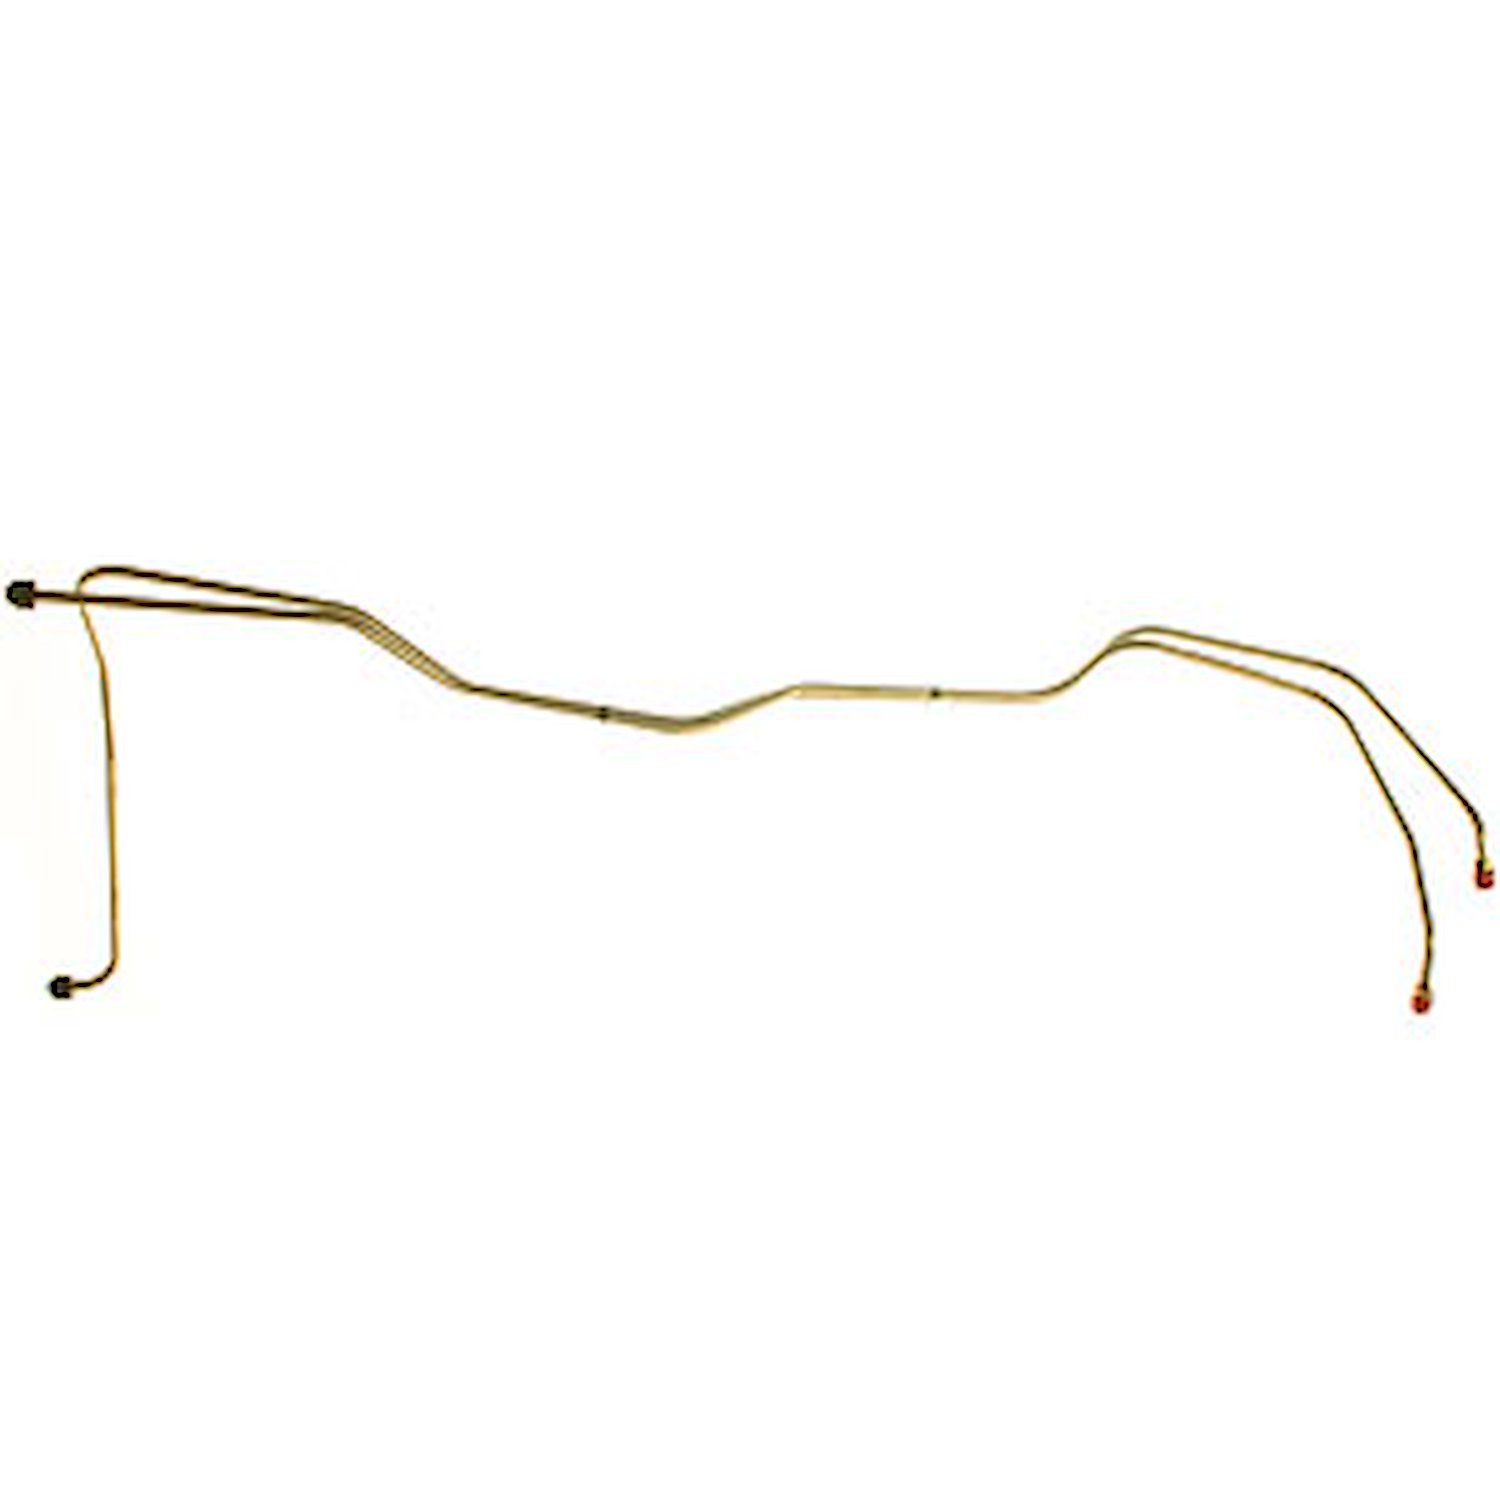 Stainless Steel Transmission Cooler Lines 1955-57 Chevy Bel